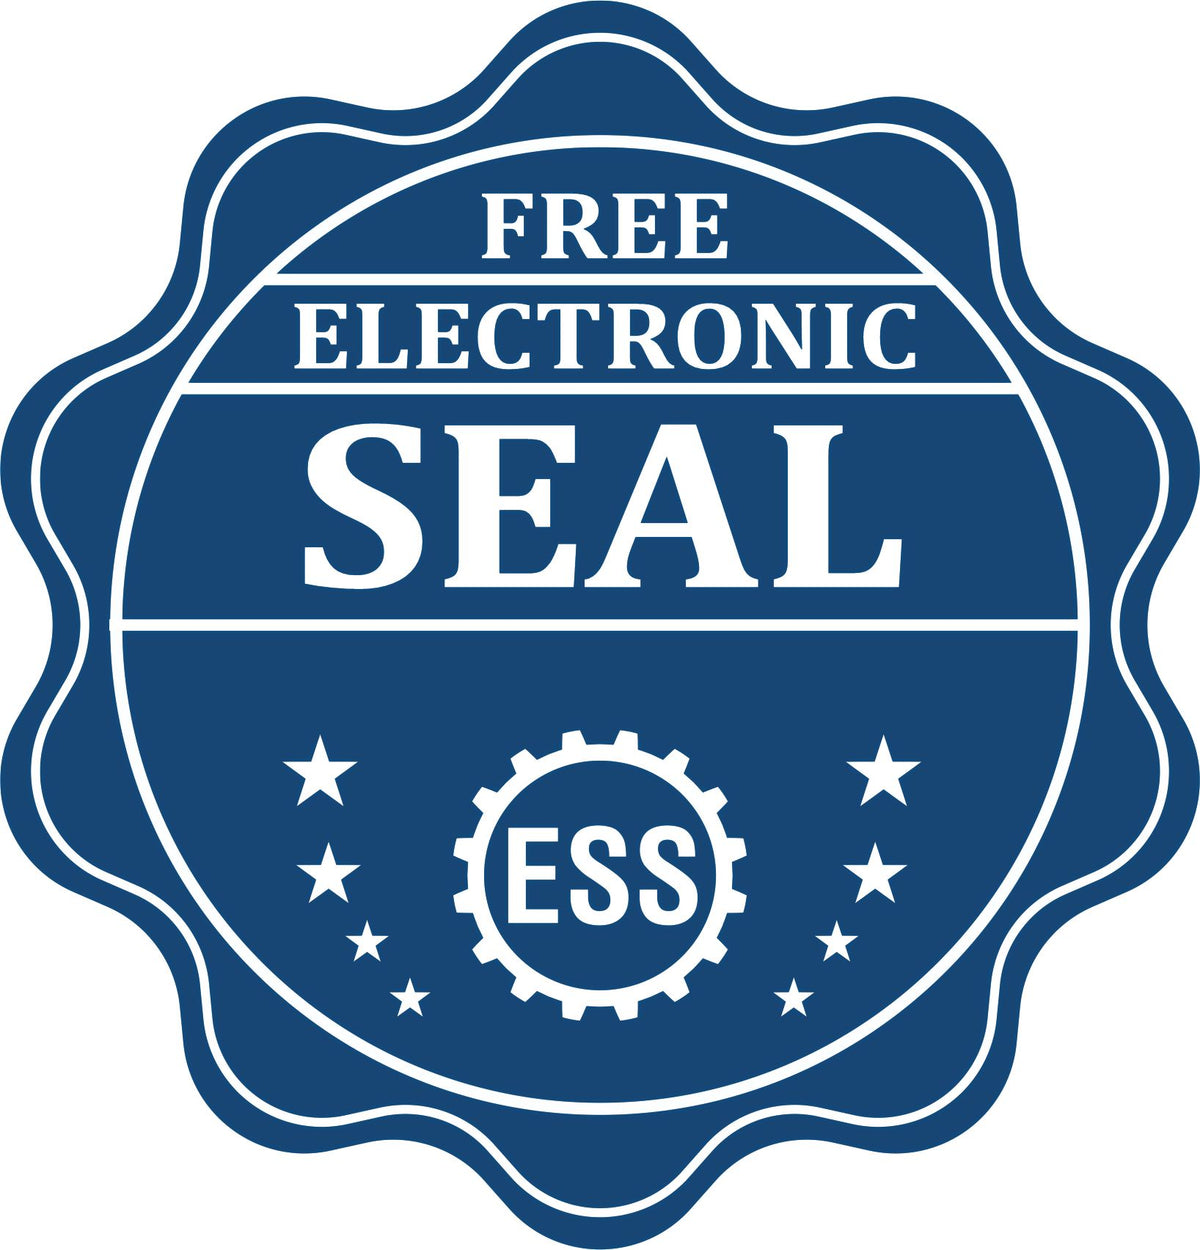 A badge showing a free electronic seal for the Slim Pre-Inked Hawaii Land Surveyor Seal Stamp with stars and the ESS gear on the emblem.